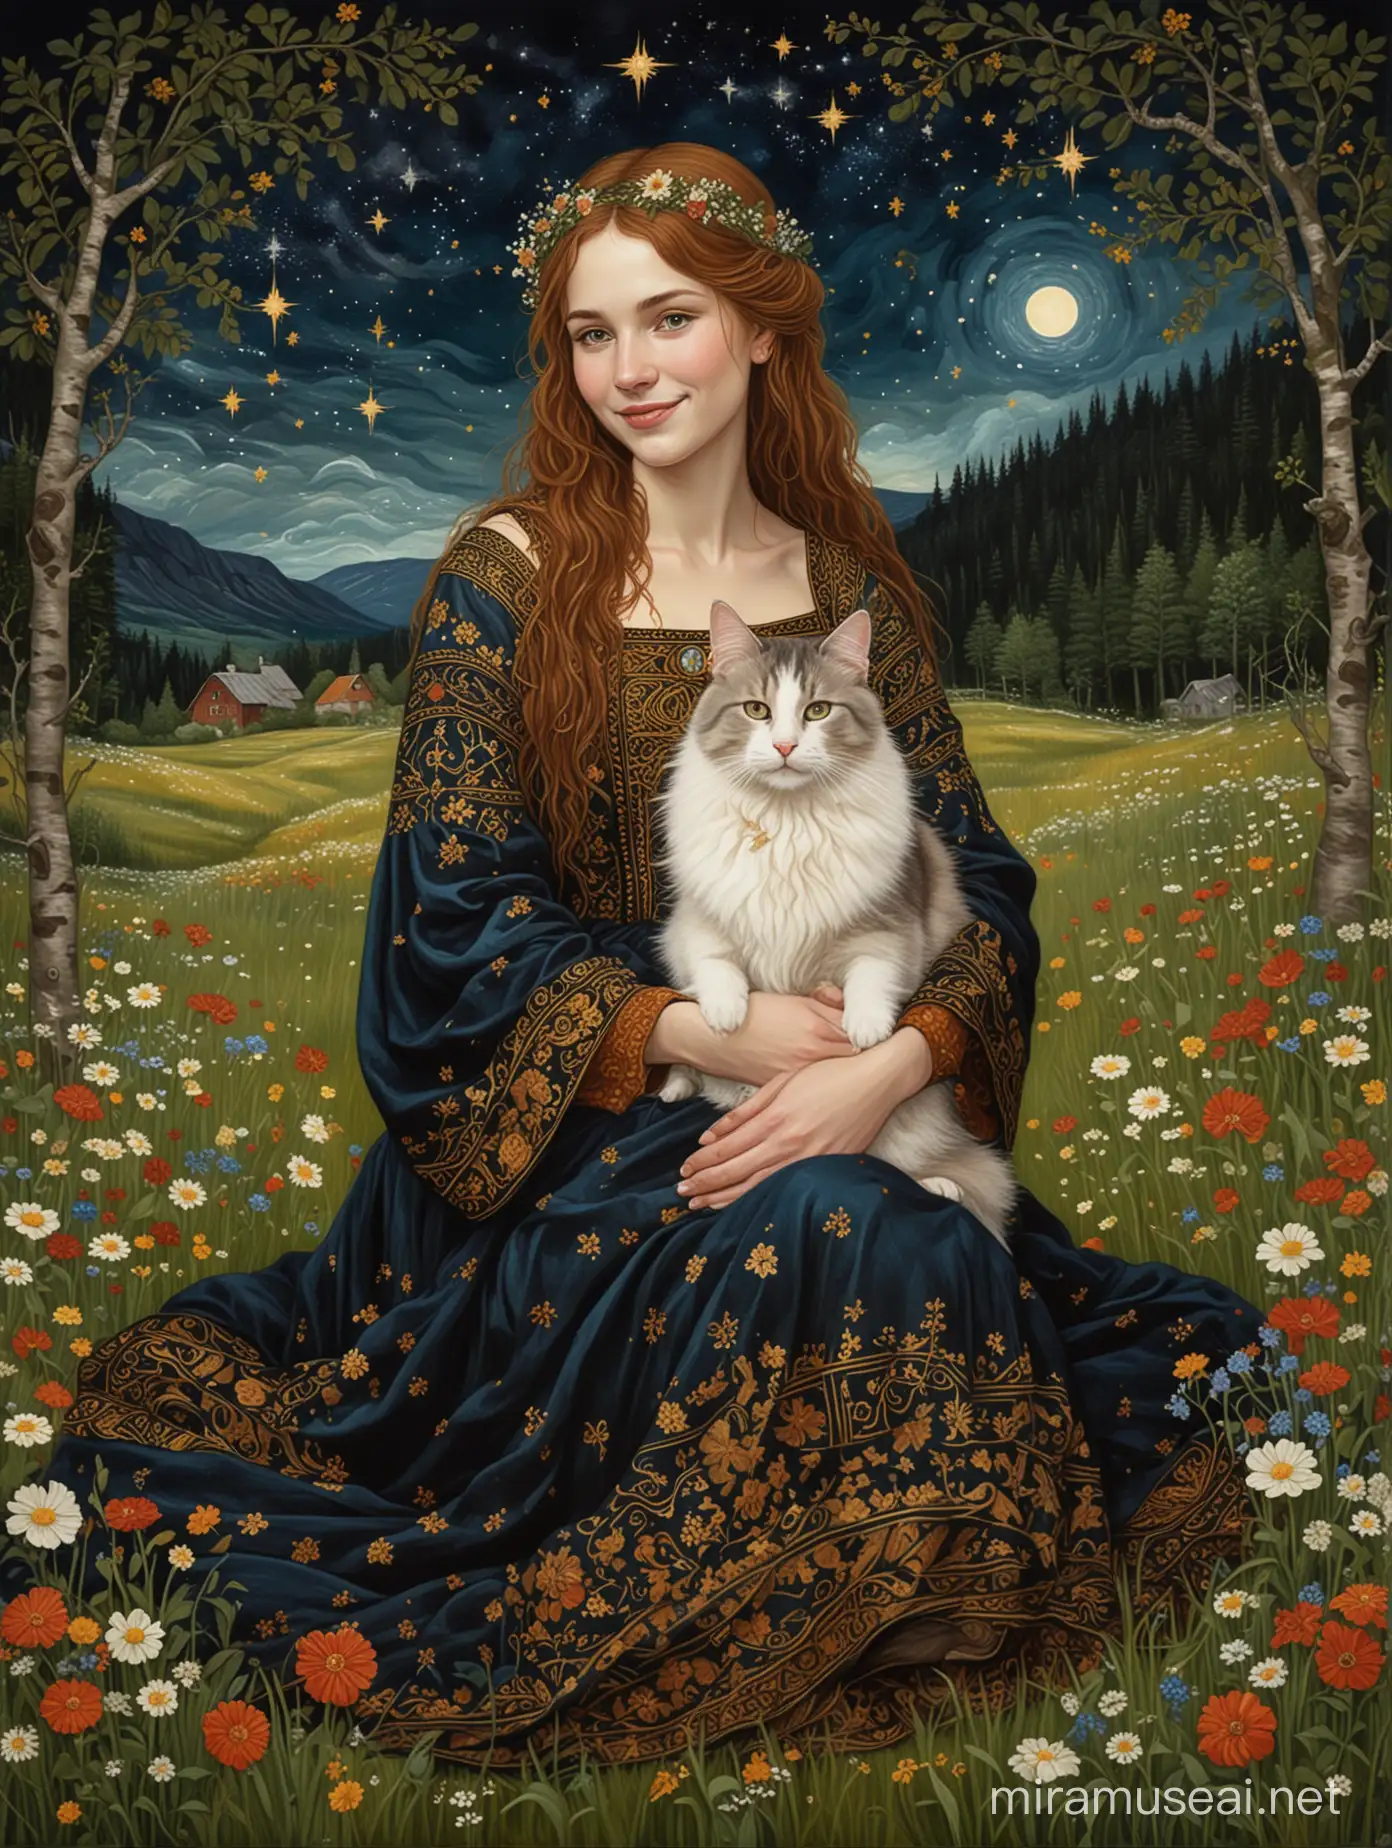 Medieval Woman with Norwegian Forest Cat in Starlit Birch Grove